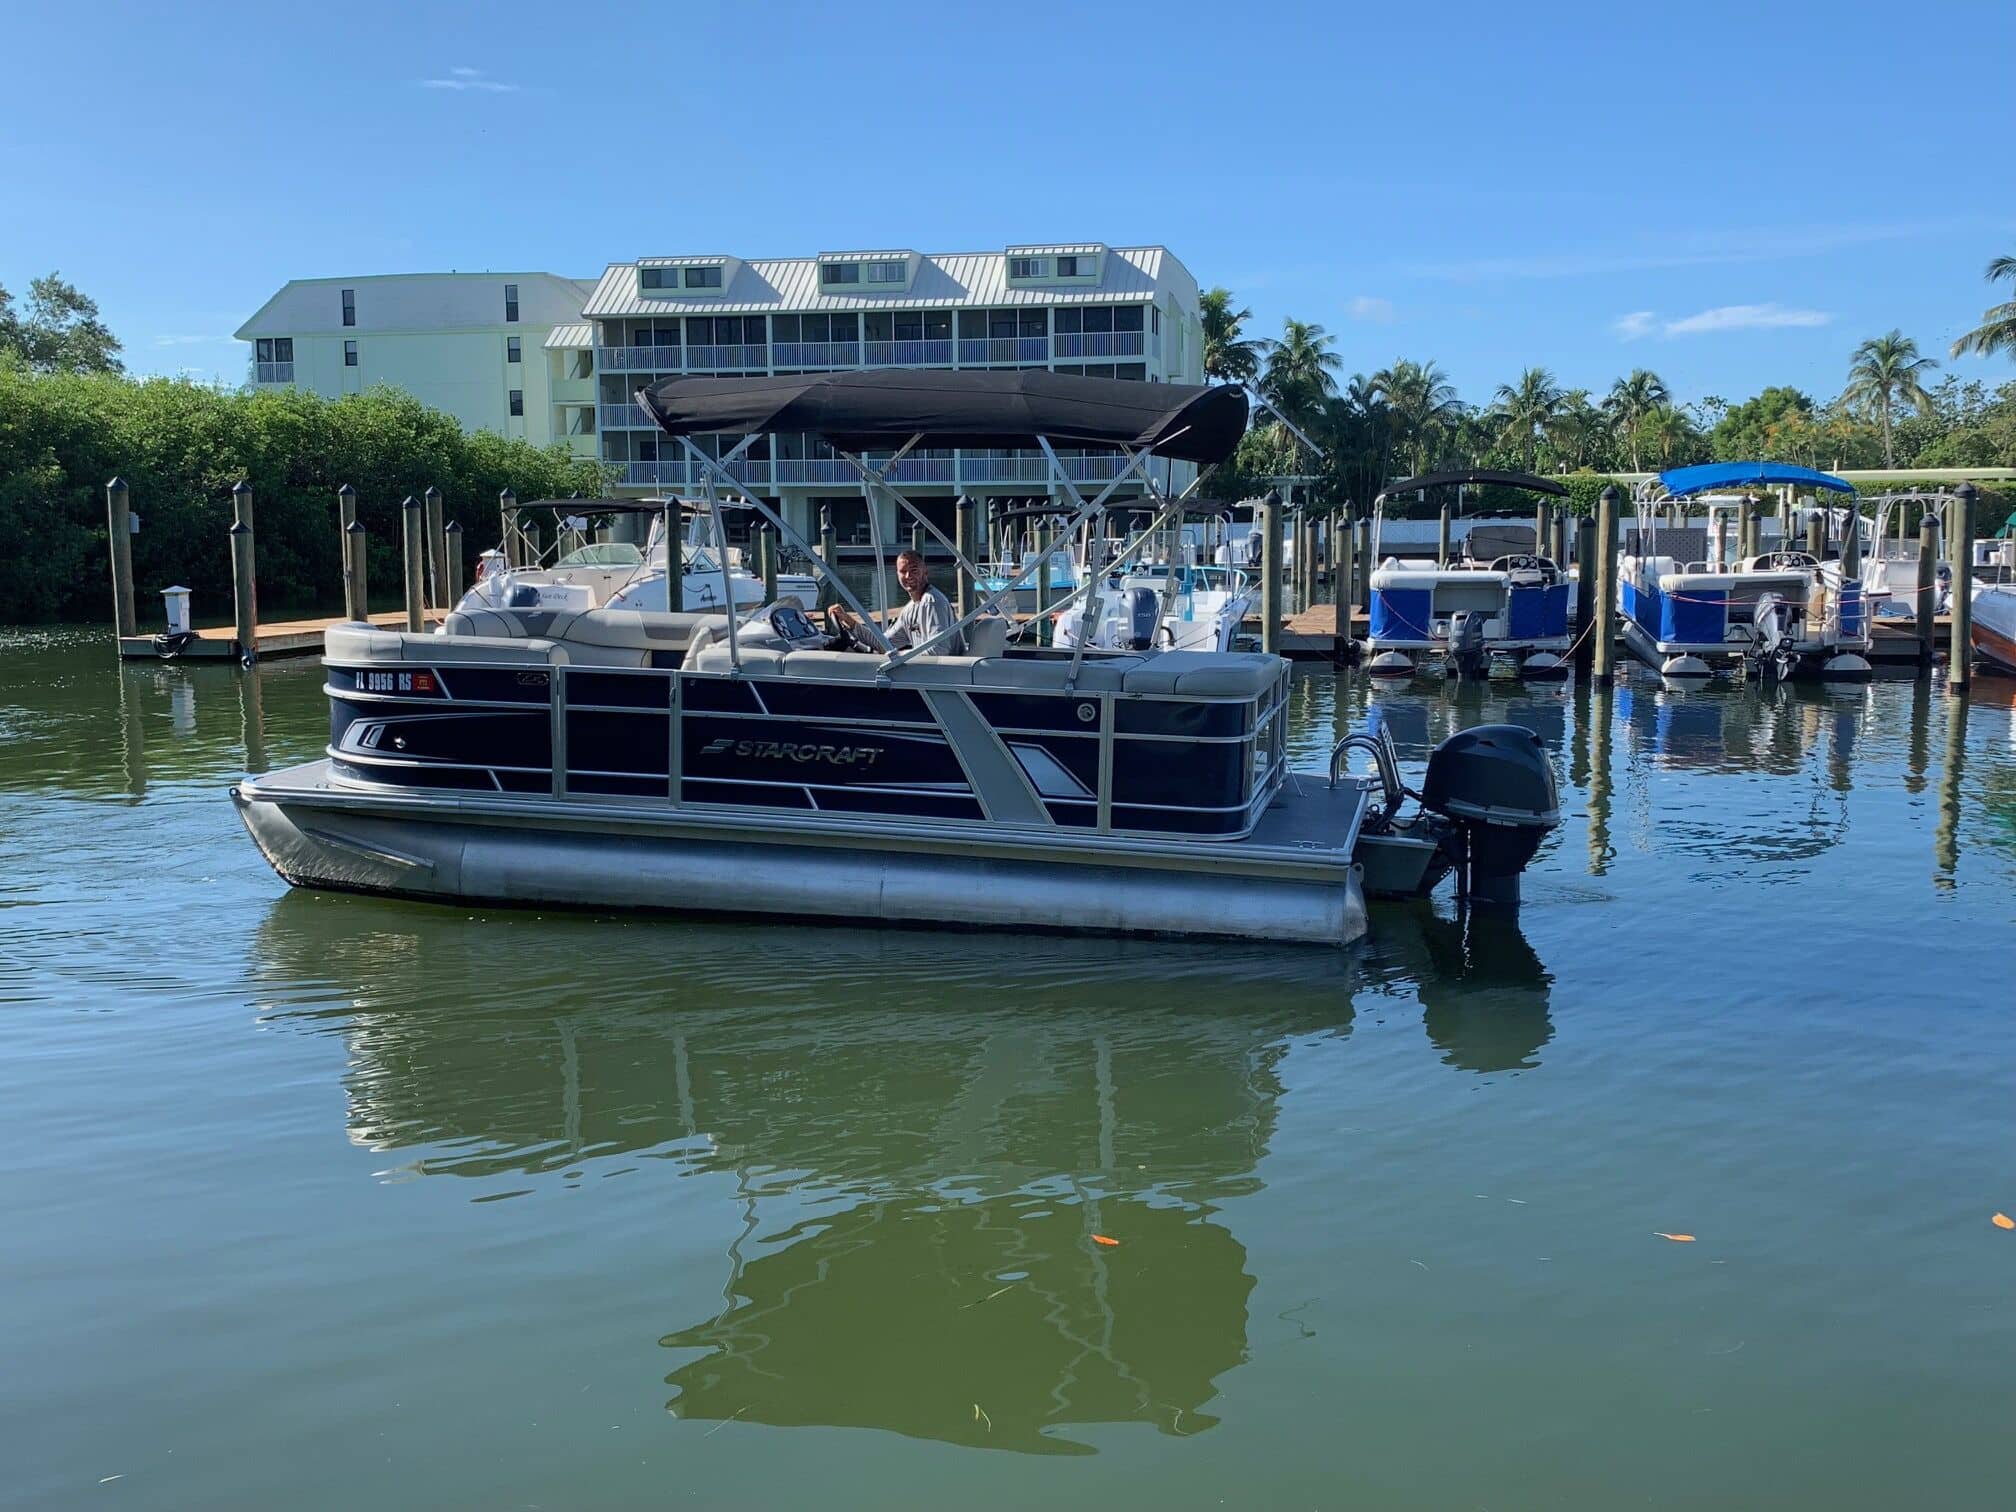 florida temporary boating license test